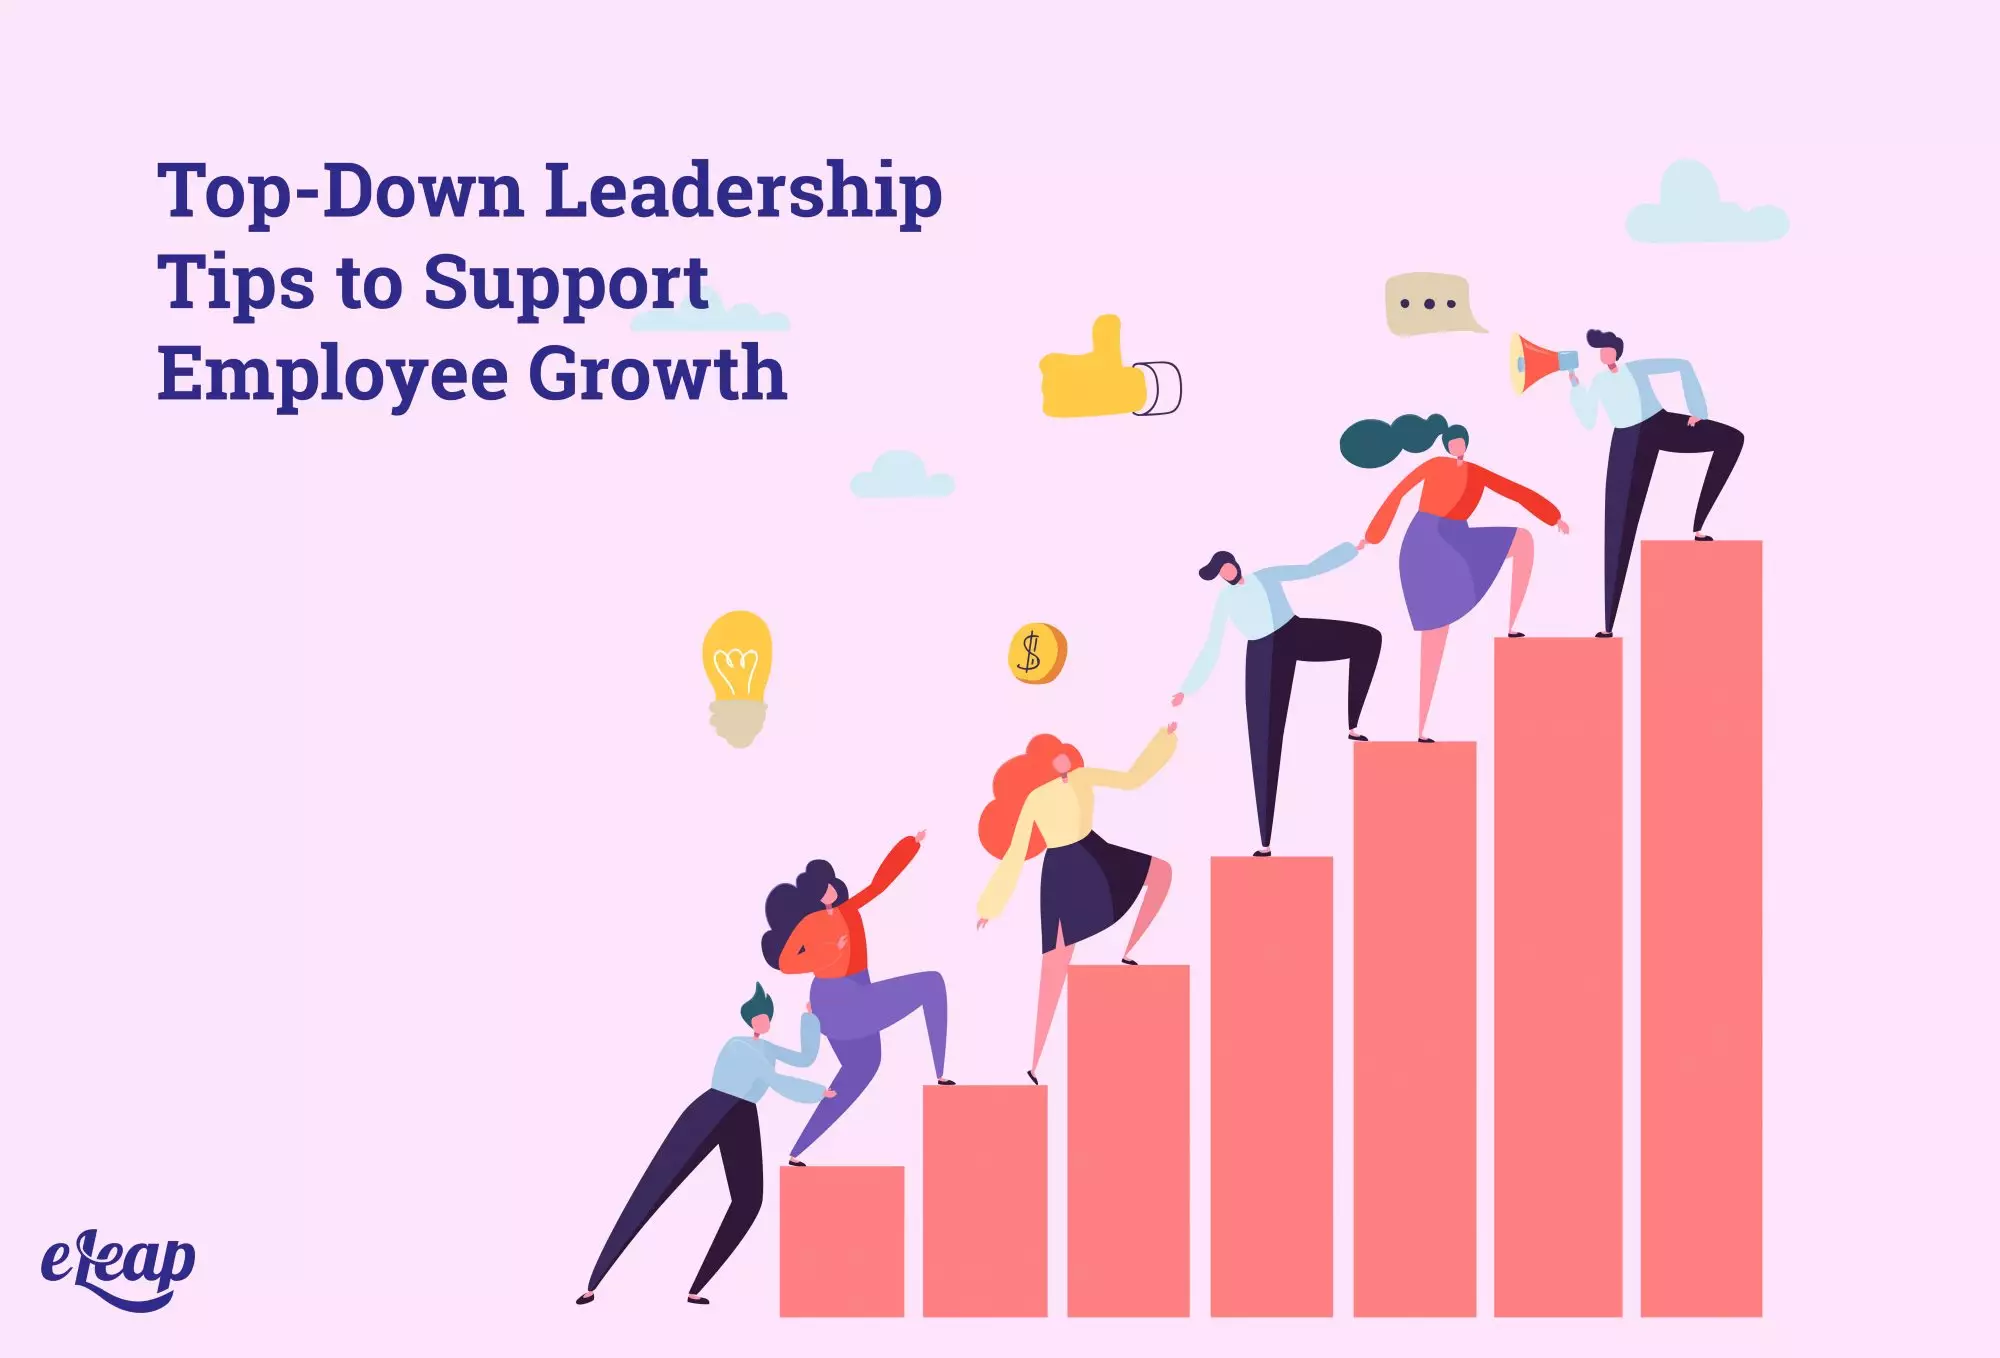 Top-Down Leadership Tips to Support Employee Growth